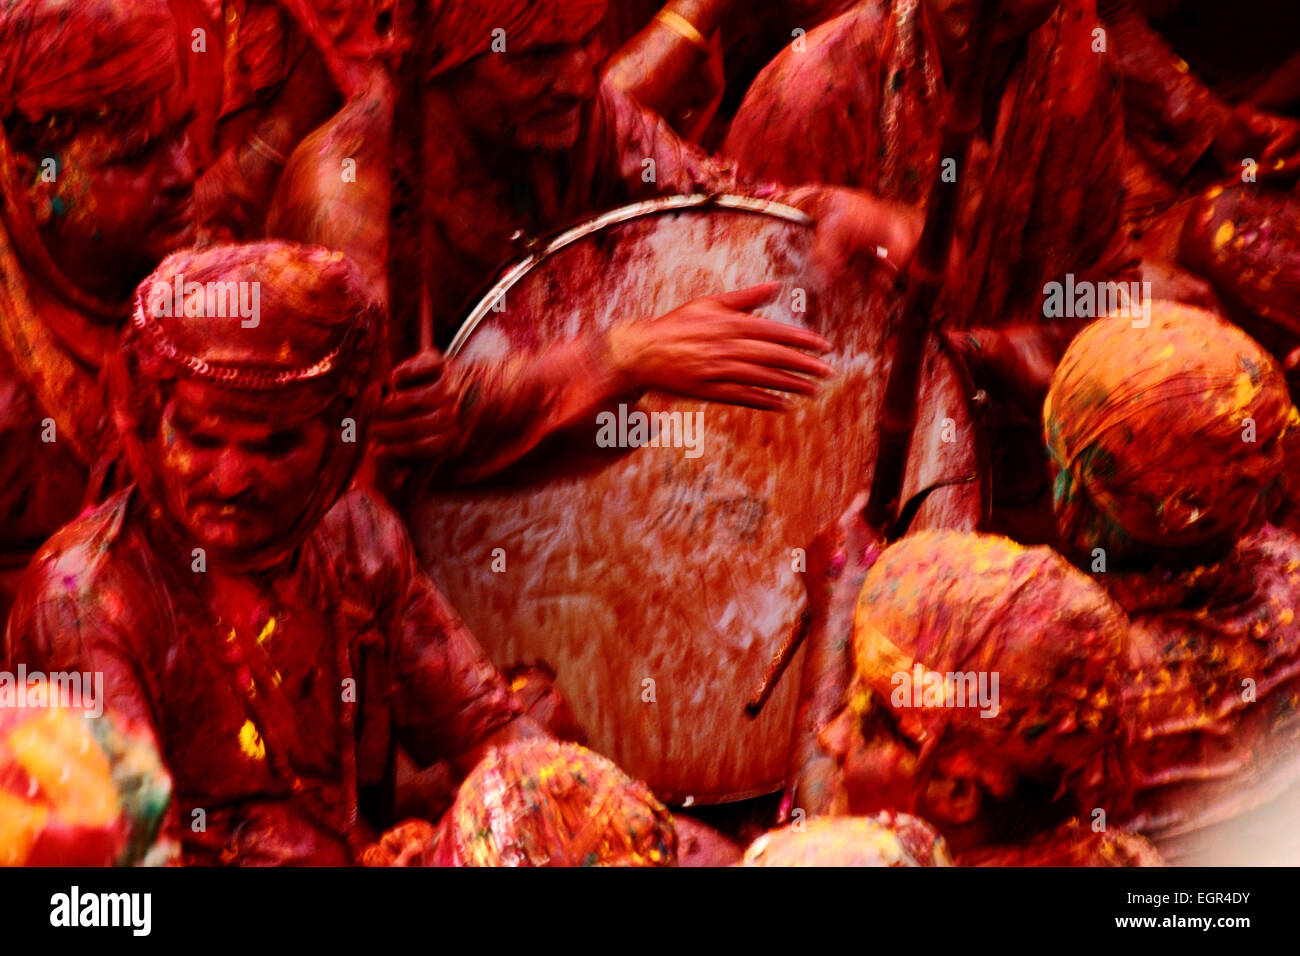 Thousands of Hindu devotees took part and celebrate 'Lathmar Holi'. The colours fill the atmosphere as people throw abeer and gulal in the air showing great joy and mirth in the arrival of this Spring Festival. The rituals of the ancient festival of Holi are religiously followed every year with care and enthusiasm. © Shashi Sharma/Pacific Press/Alamy Live News Stock Photo